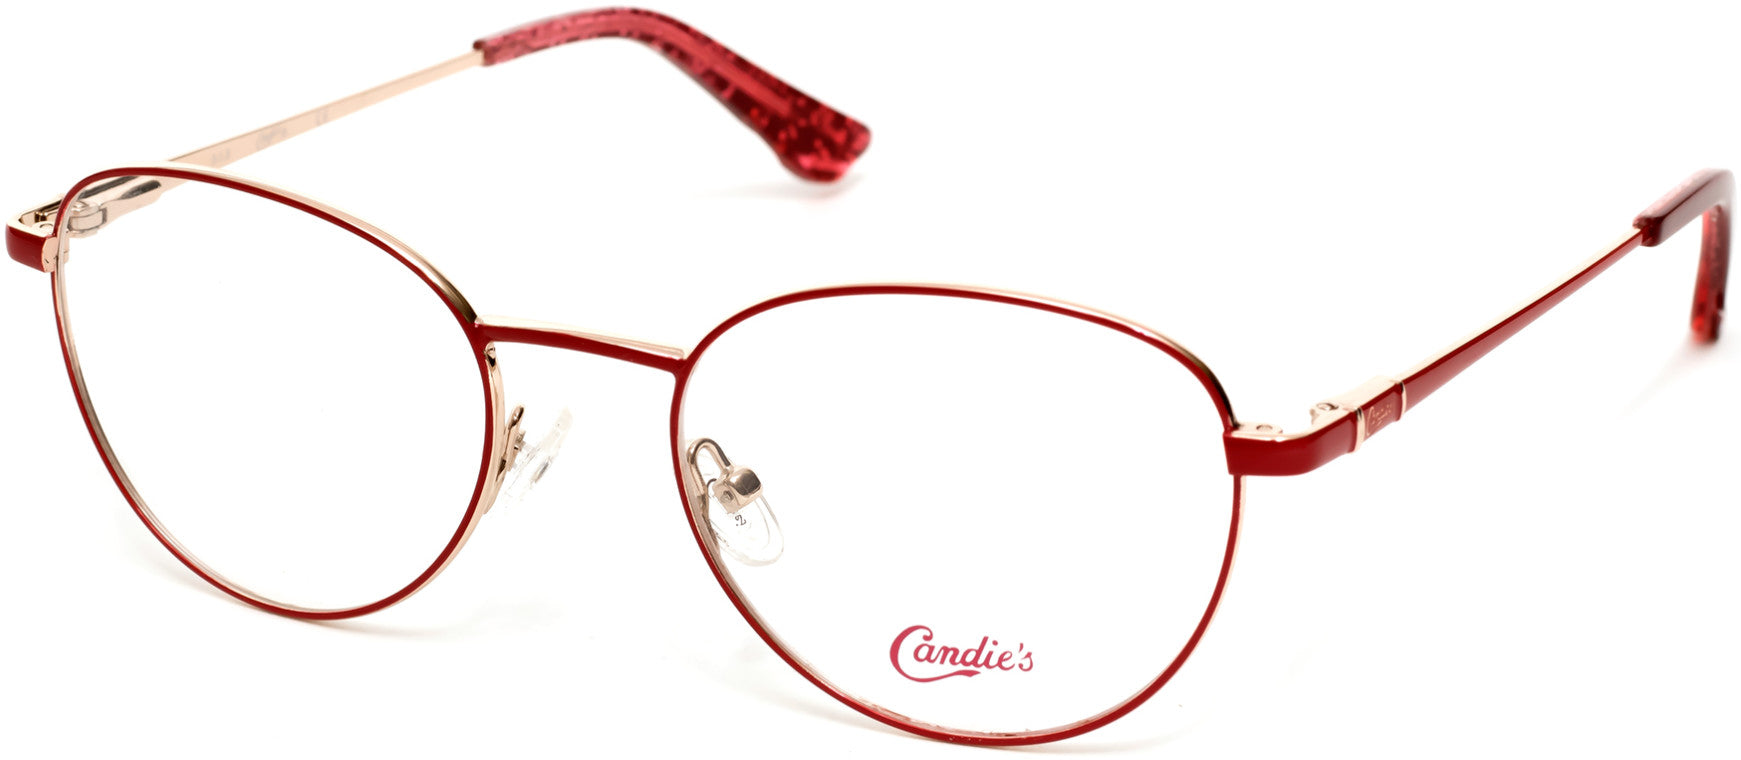 Candies CA0168 Oval Eyeglasses 066-066 - Shiny Red